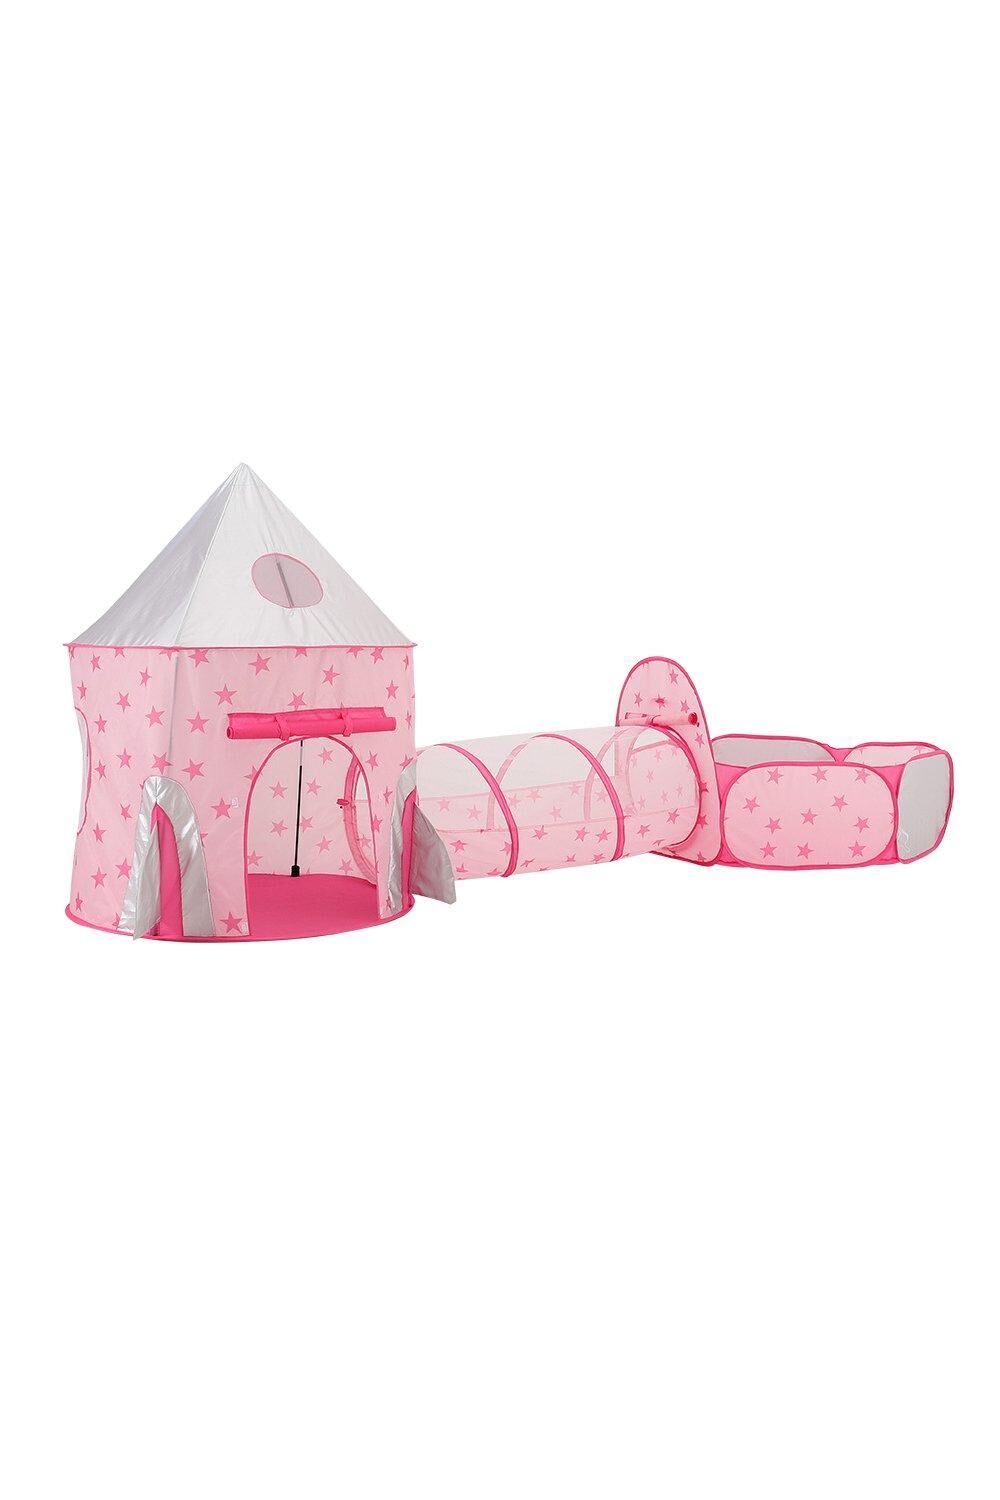 Living and Home Kids Tent Castle Play Tent for Indoor & Outdoor